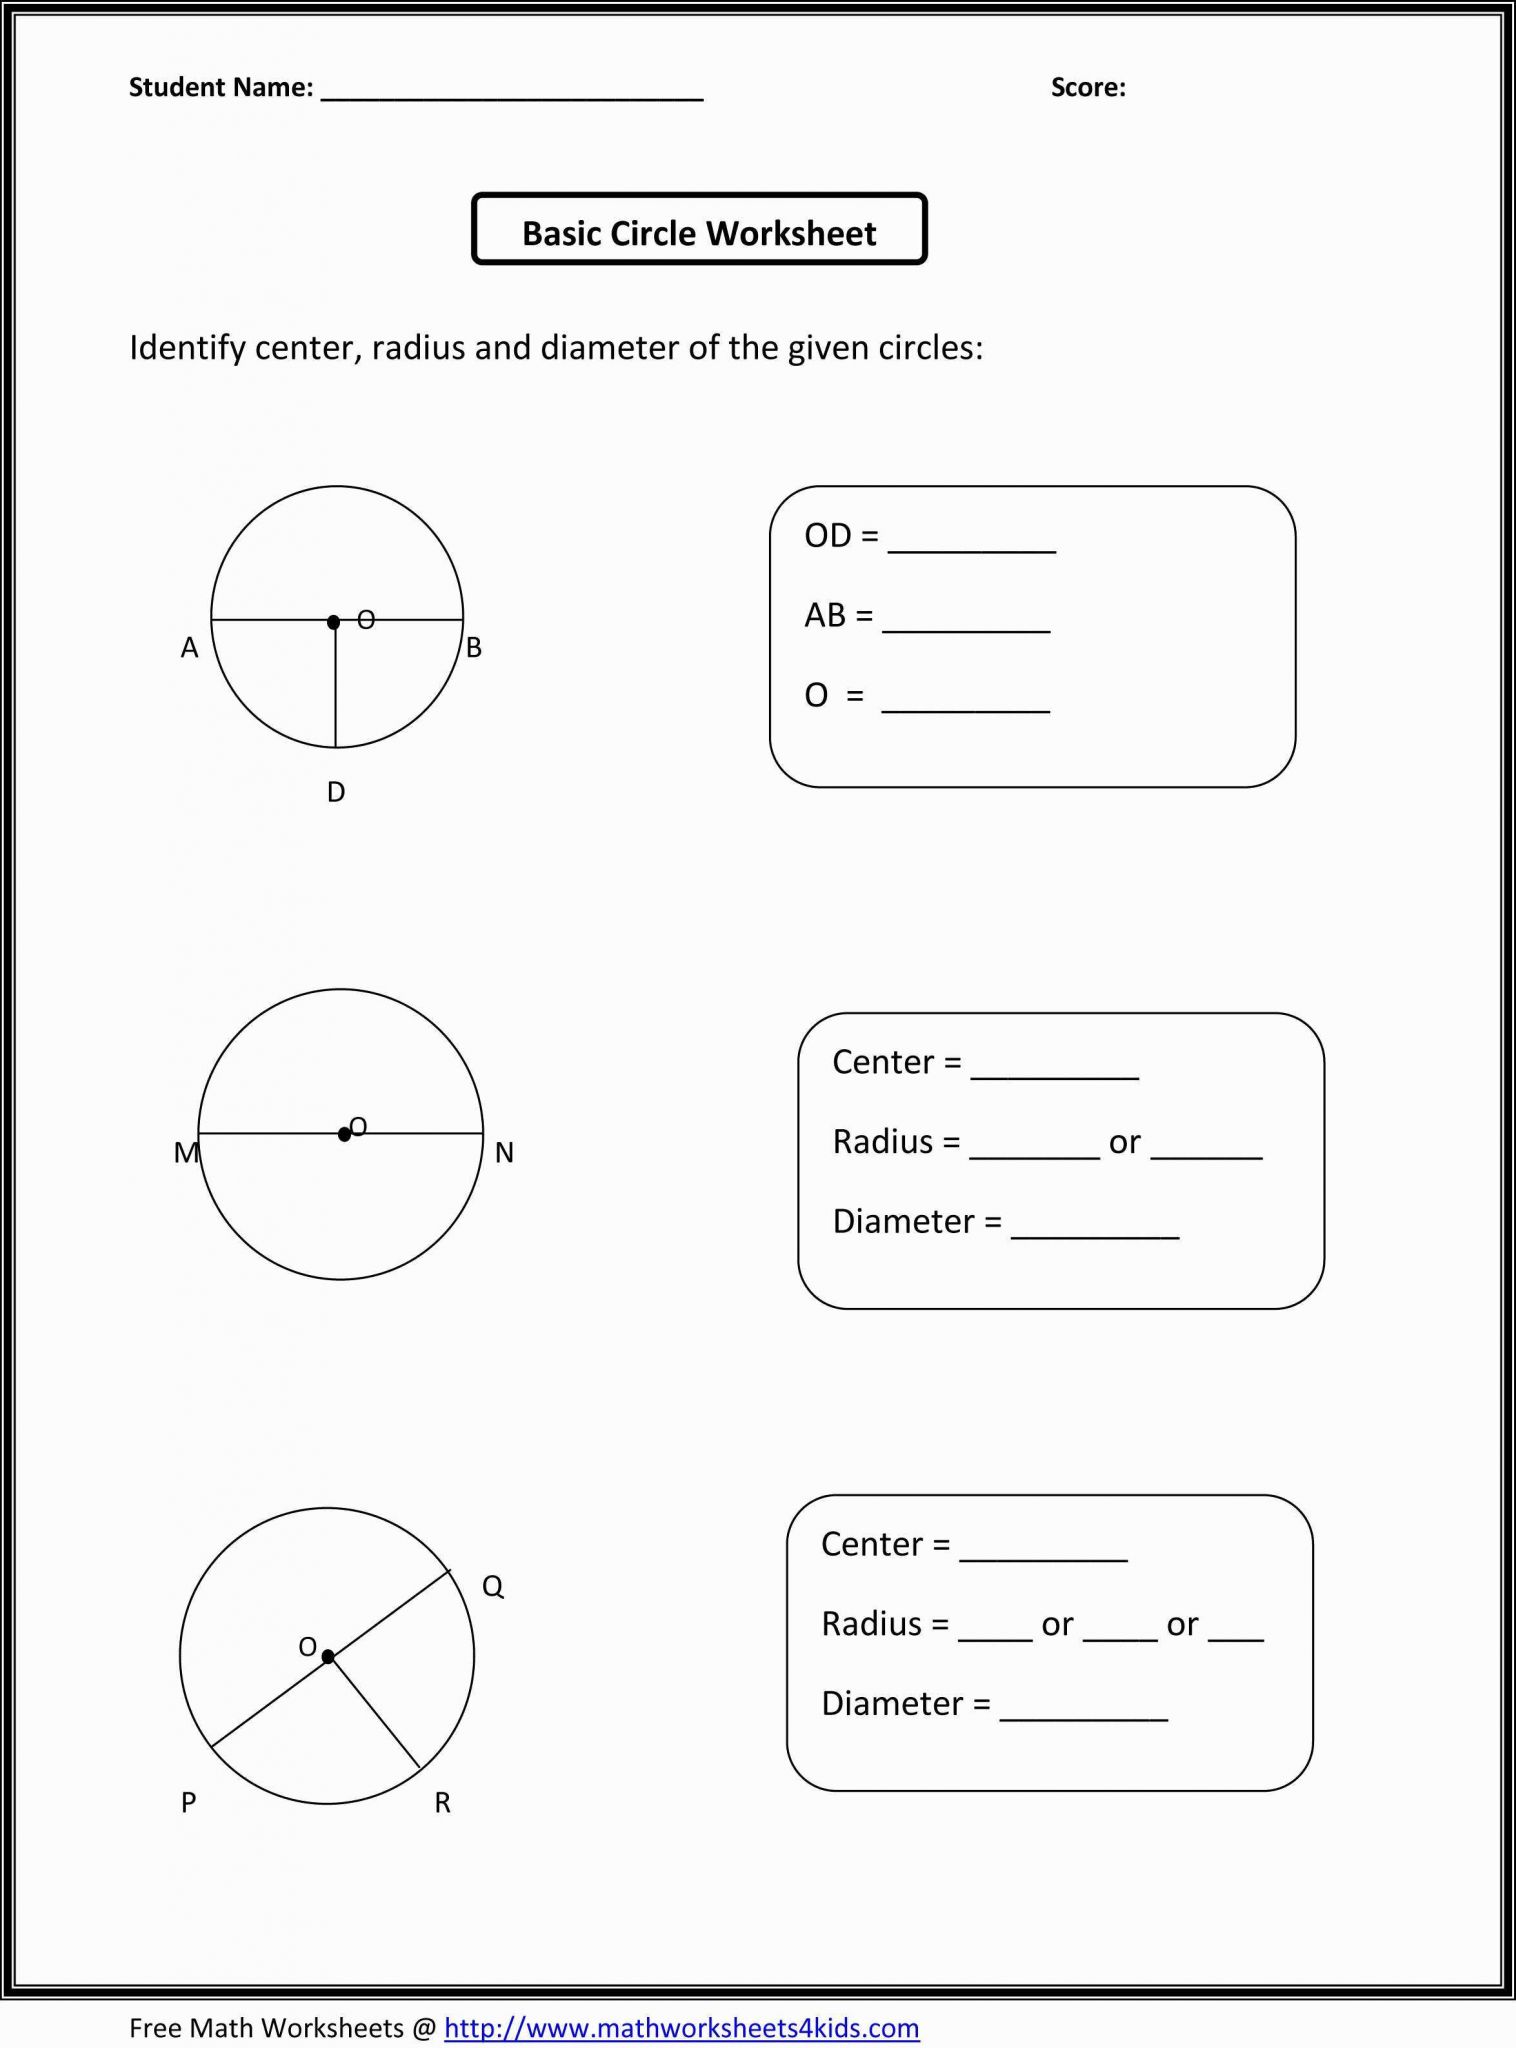 Art History Worksheets Pdf with Free 3rd Grade Geometry Worksheets 3rd Grade Free